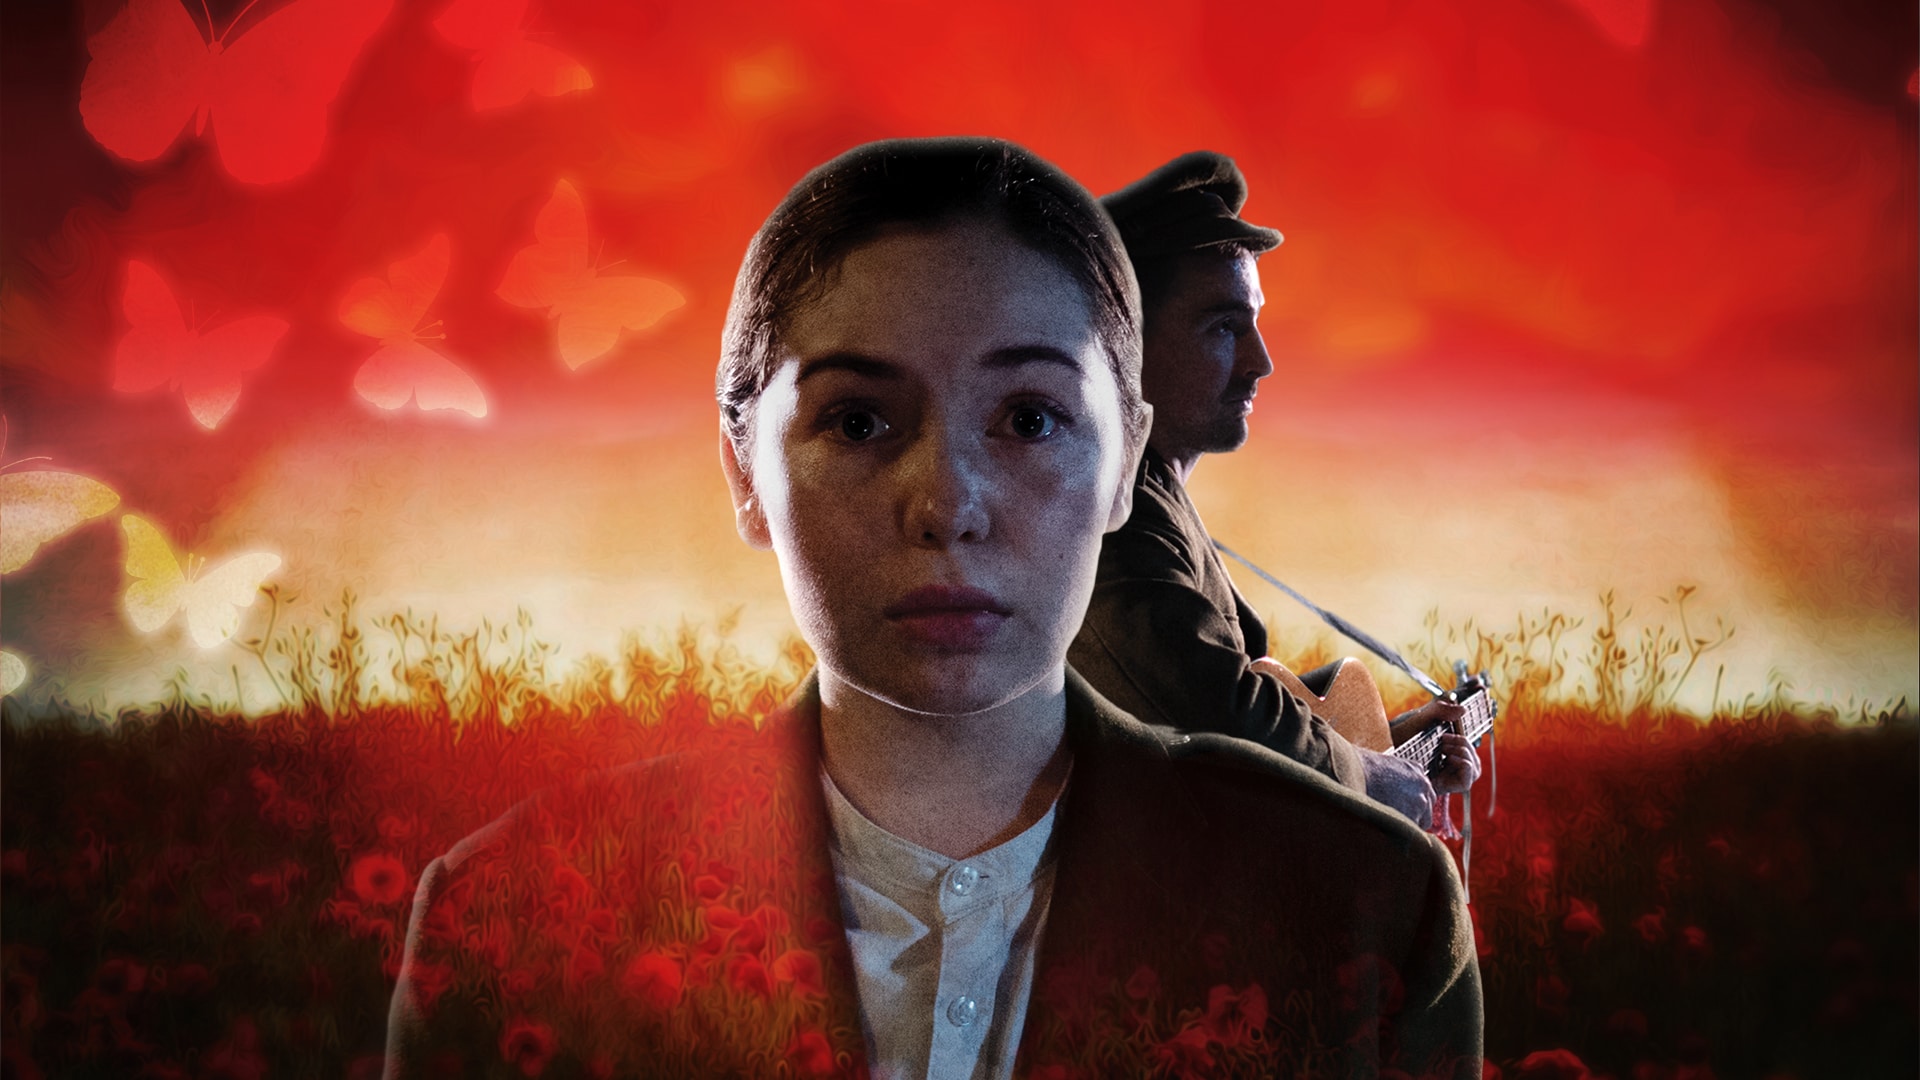 Private Peaceful promotional image - A child in the foreground, wide-eyed, the silhouet of a soldier against a bright red background behind them